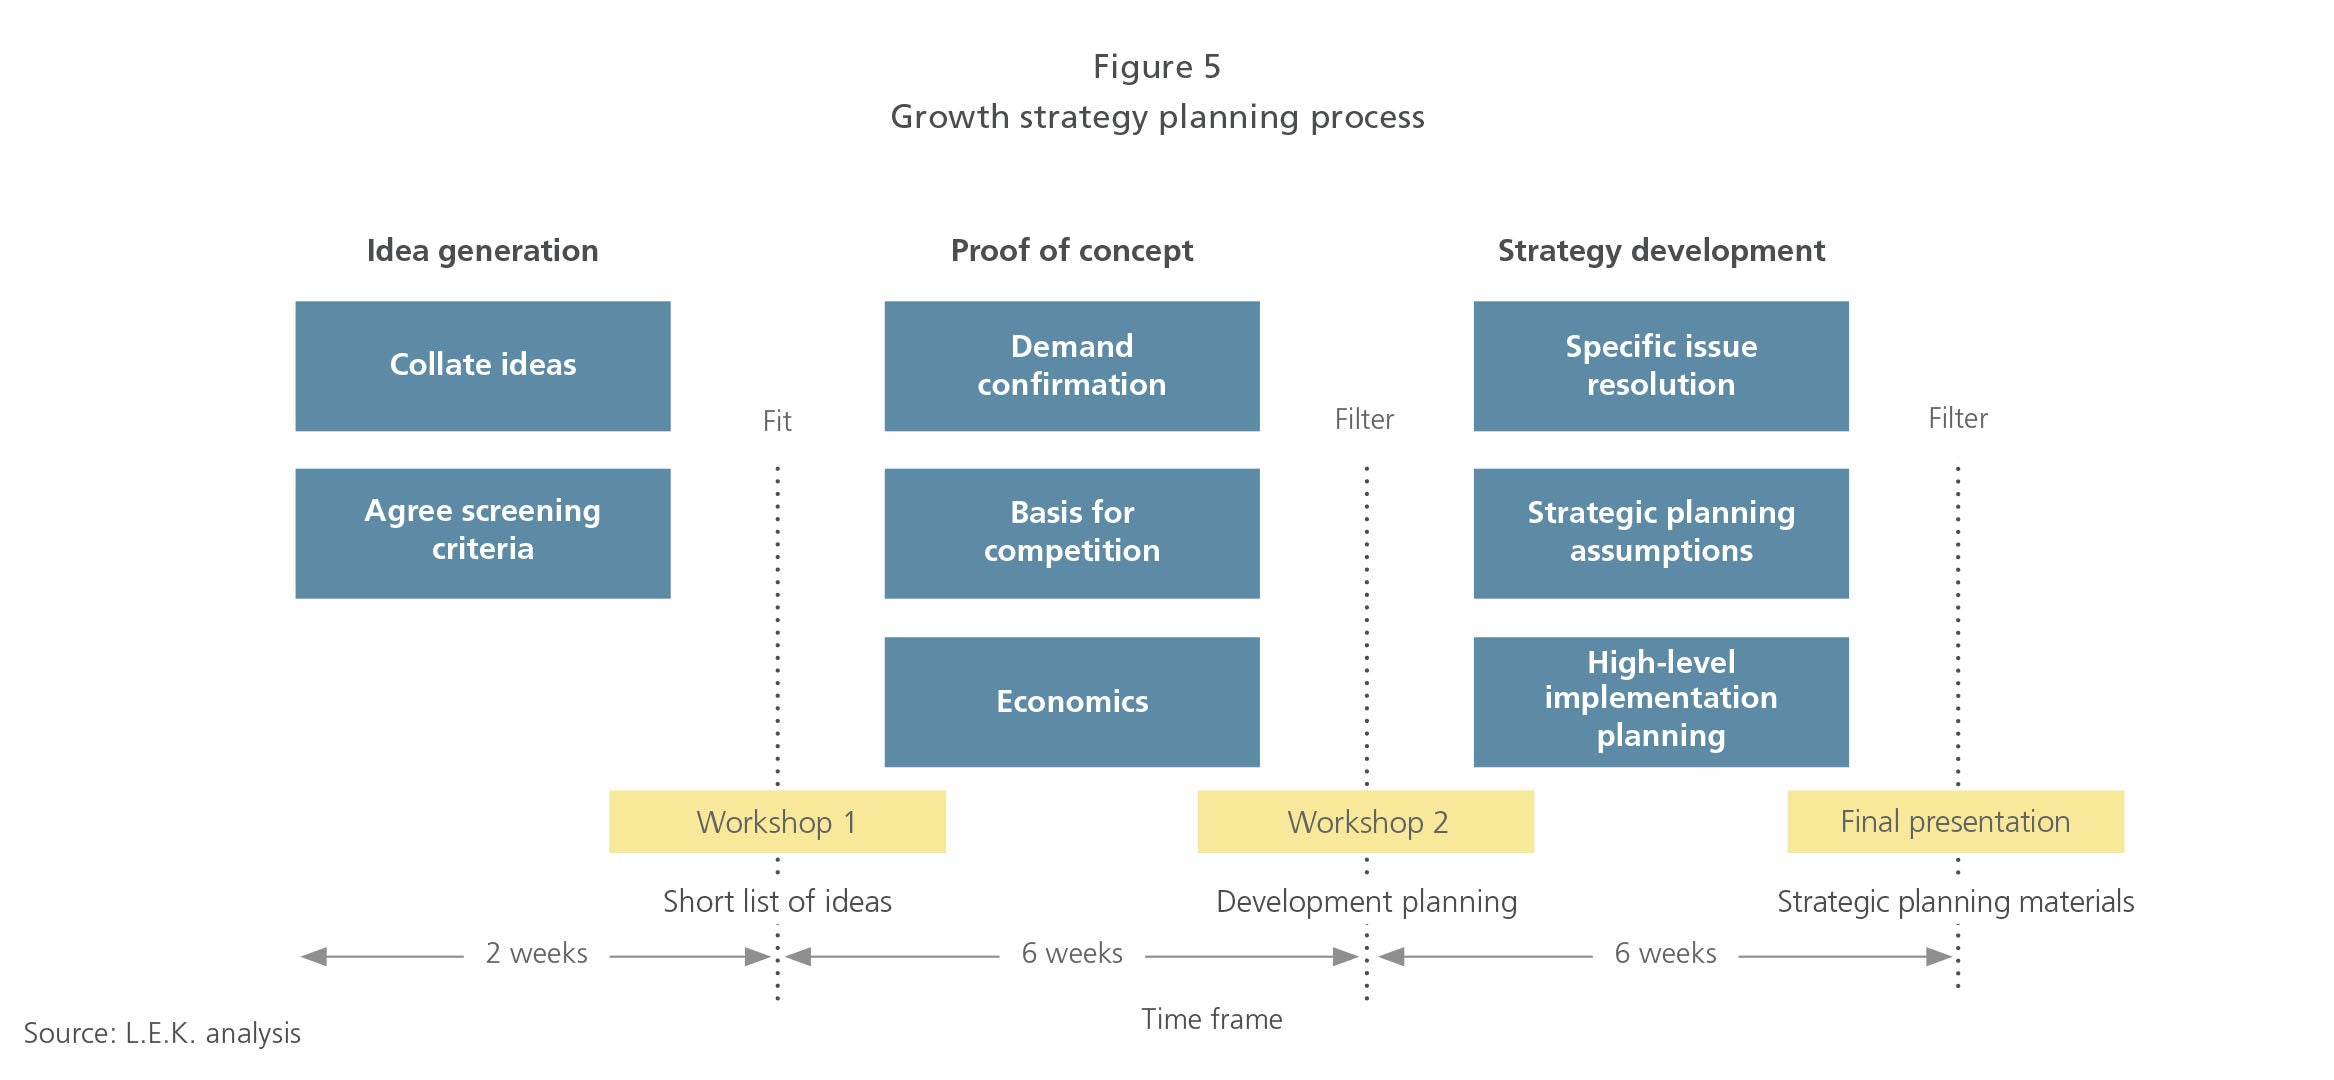 Growth strategy planning process